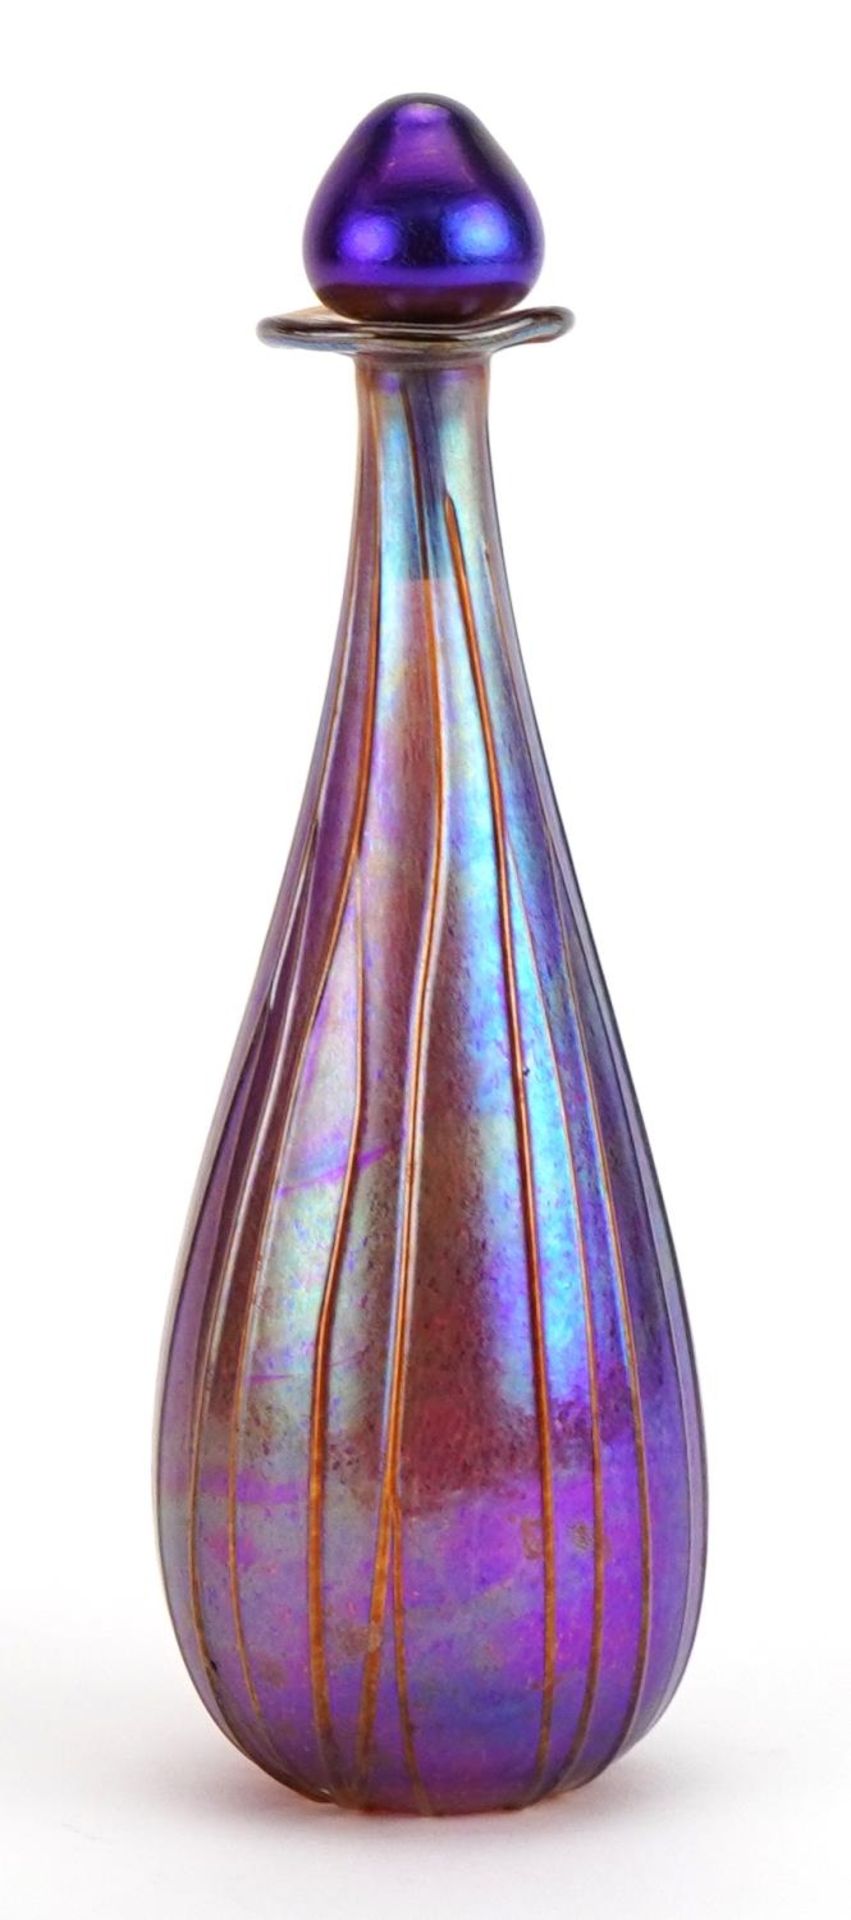 Siddy Langley, large iridescent art glass scent bottle with stopper, etched Siddy Langley around the